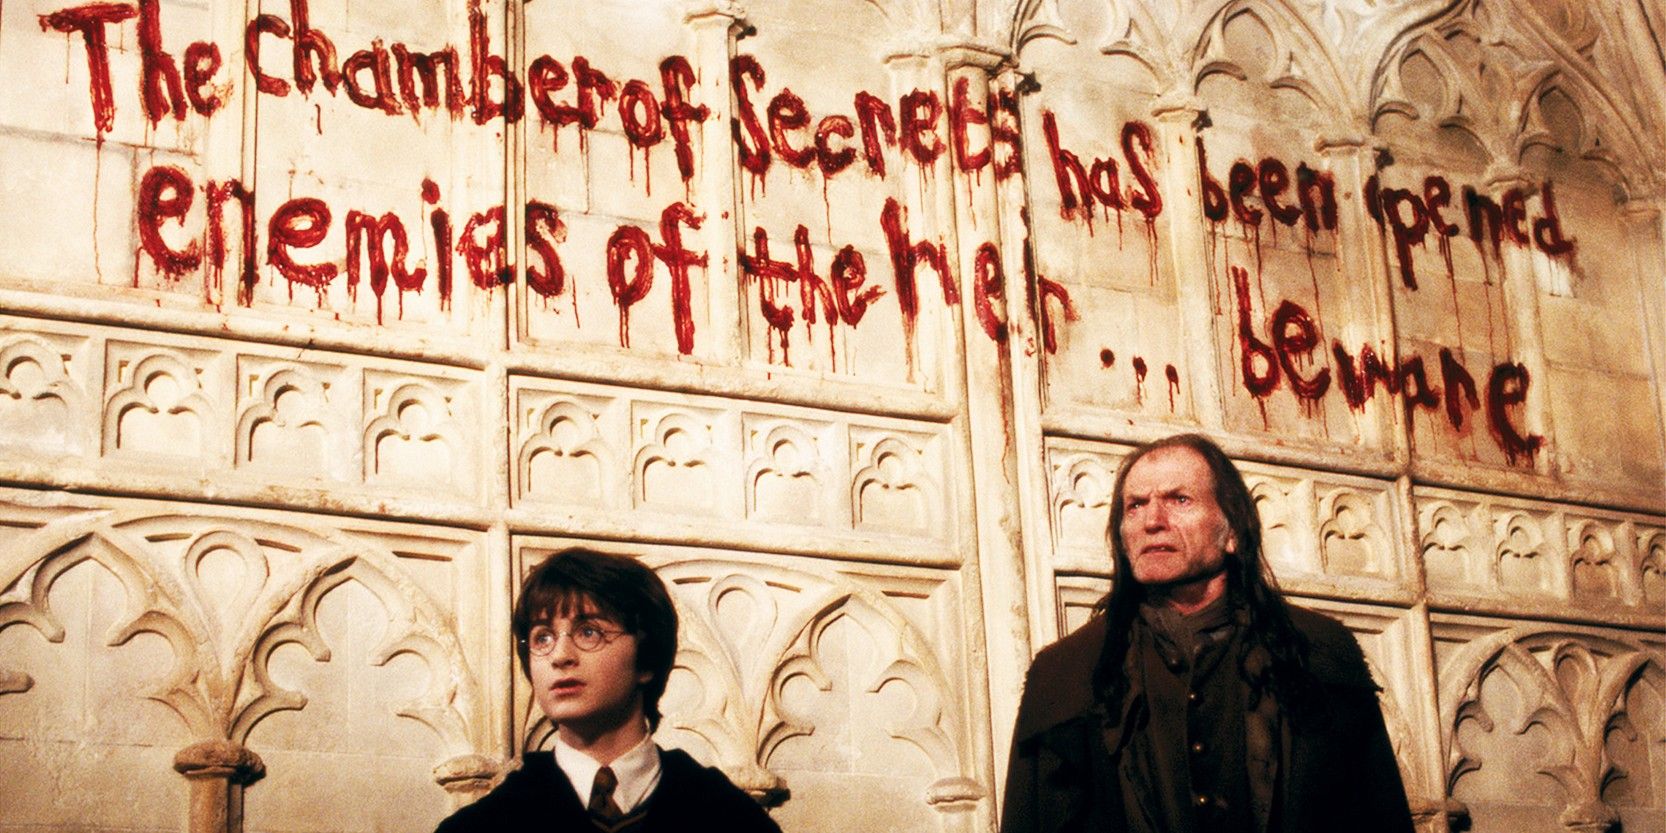 Daniel Radcliffe as Harry Potter and David Bradley as Filch in The Chamber of Secrets